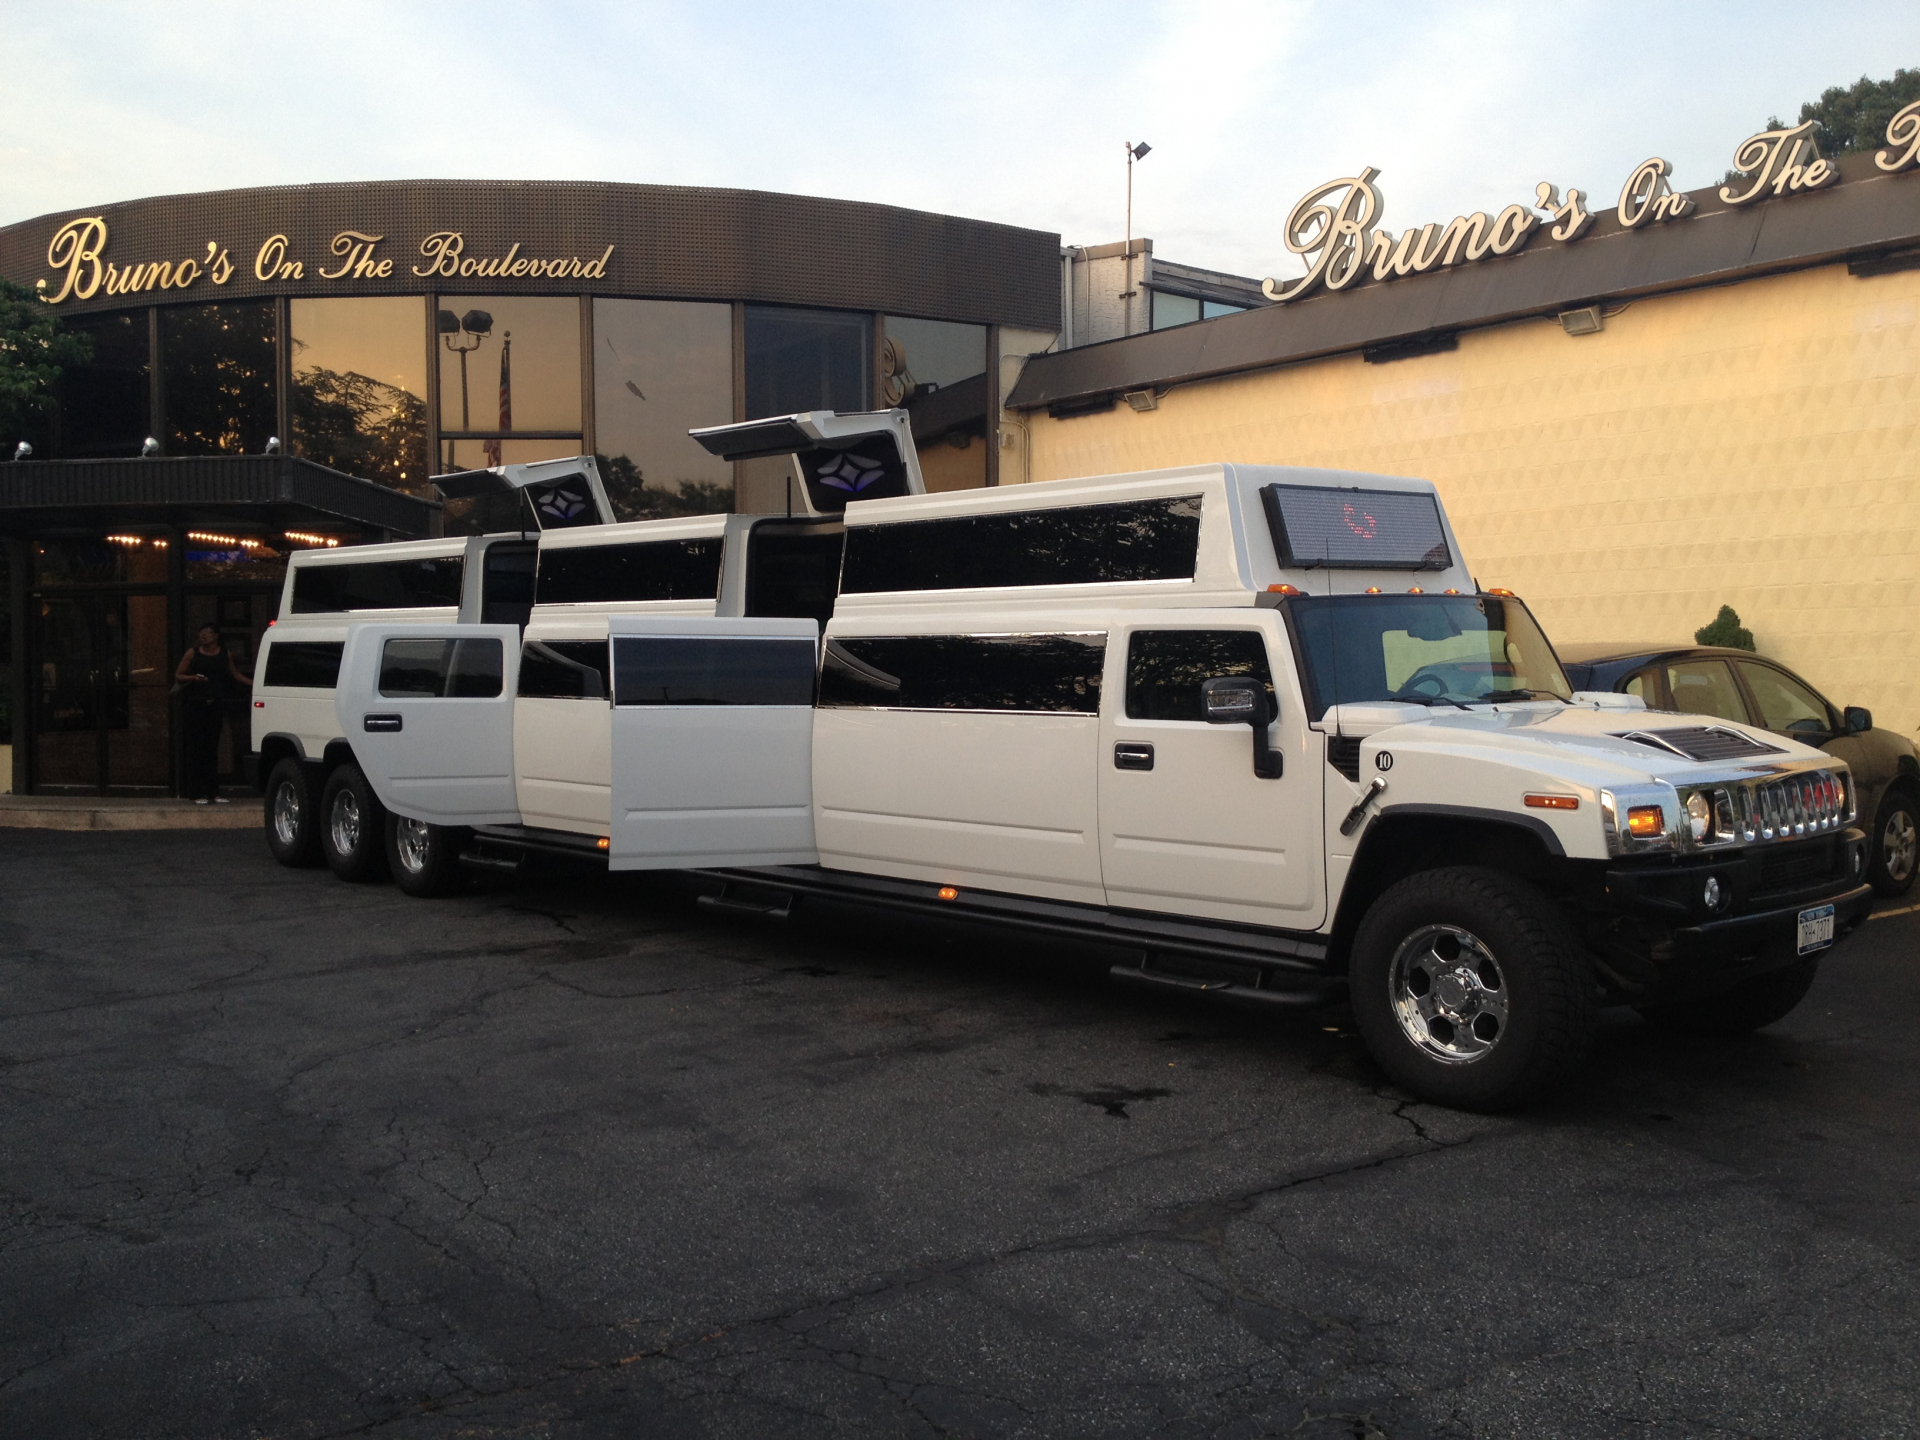 Galaxy Hummer Party Double Deck White 24 Passenger - Jet doors
Hummer /
New York, NY

 / Hourly $0.00
